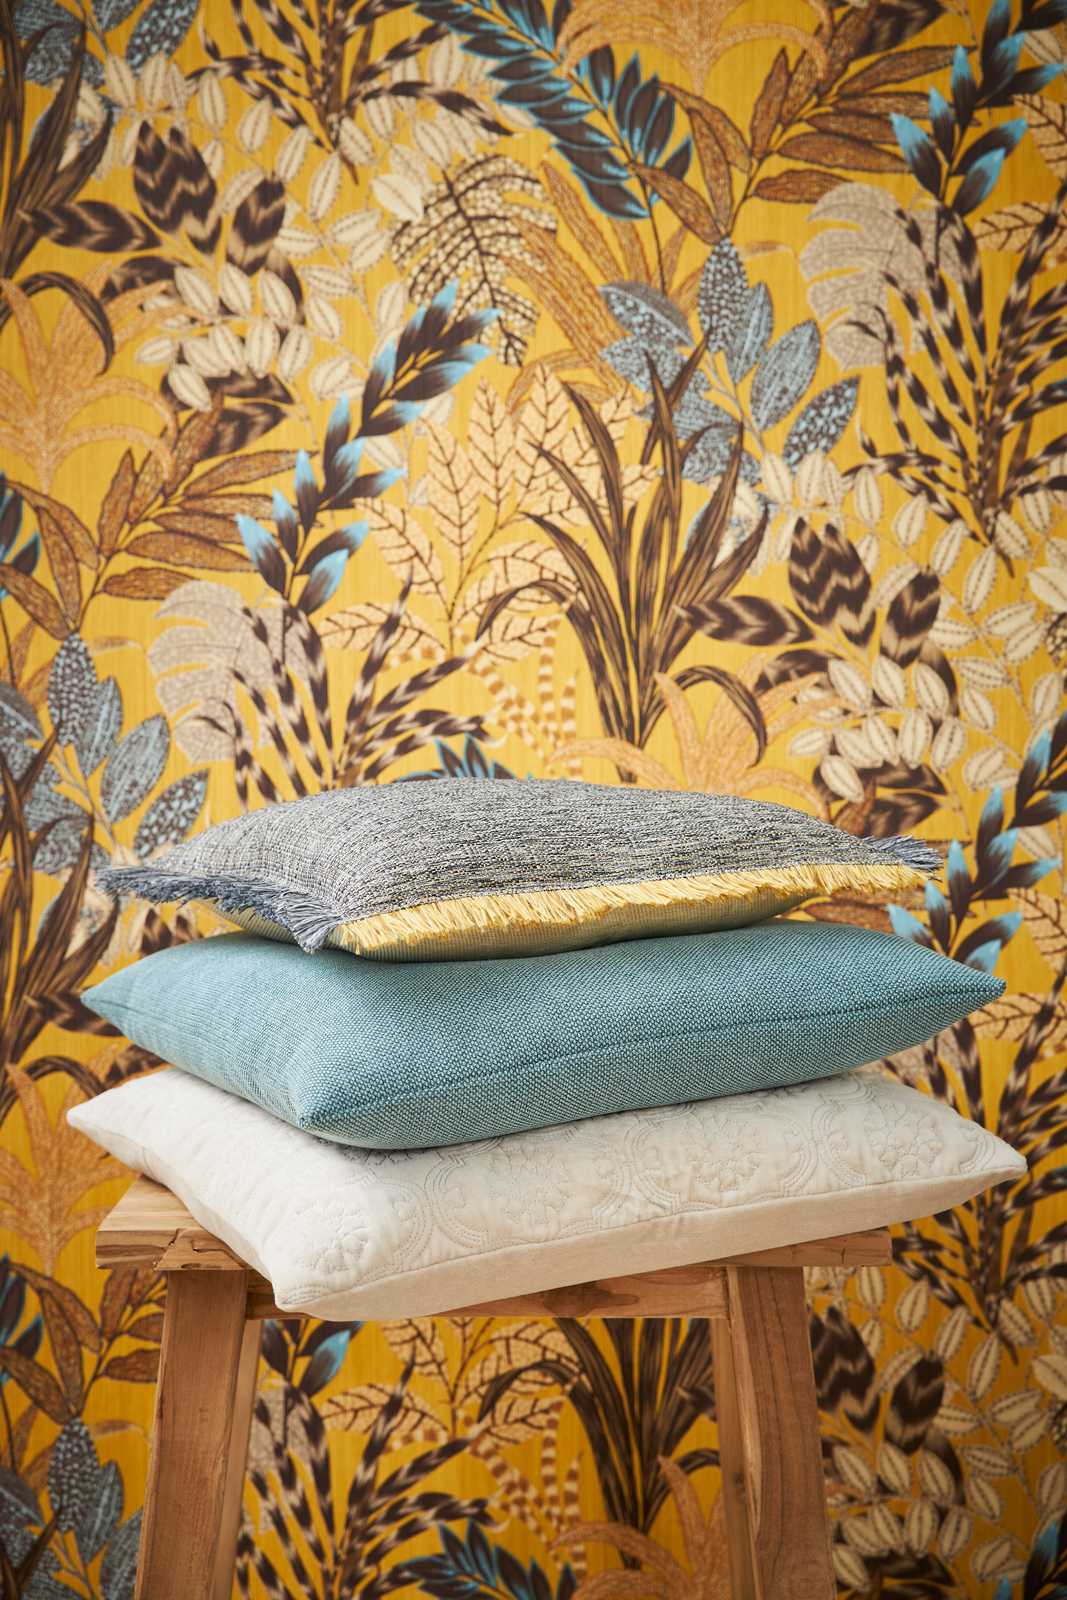             Wallpaper with leaves motif in bright colours - brown, colourful, yellow
        